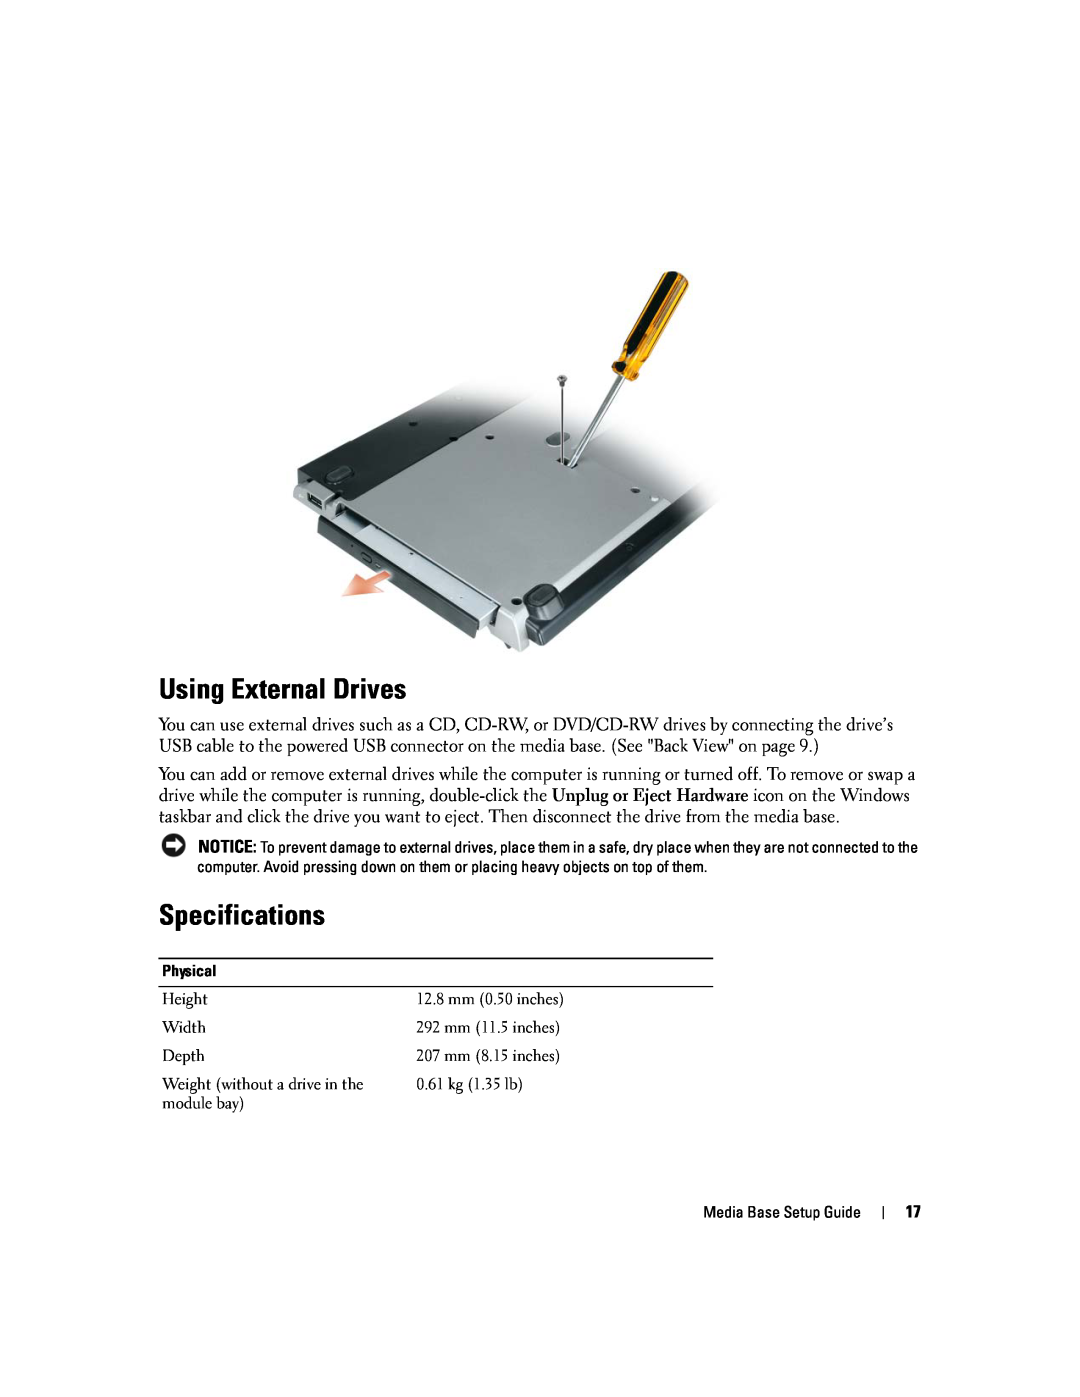 Dell Model PR09S Using External Drives, Specifications, Height, 12.8 mm 0.50 inches, Width, 292 mm 11.5 inches, Depth 